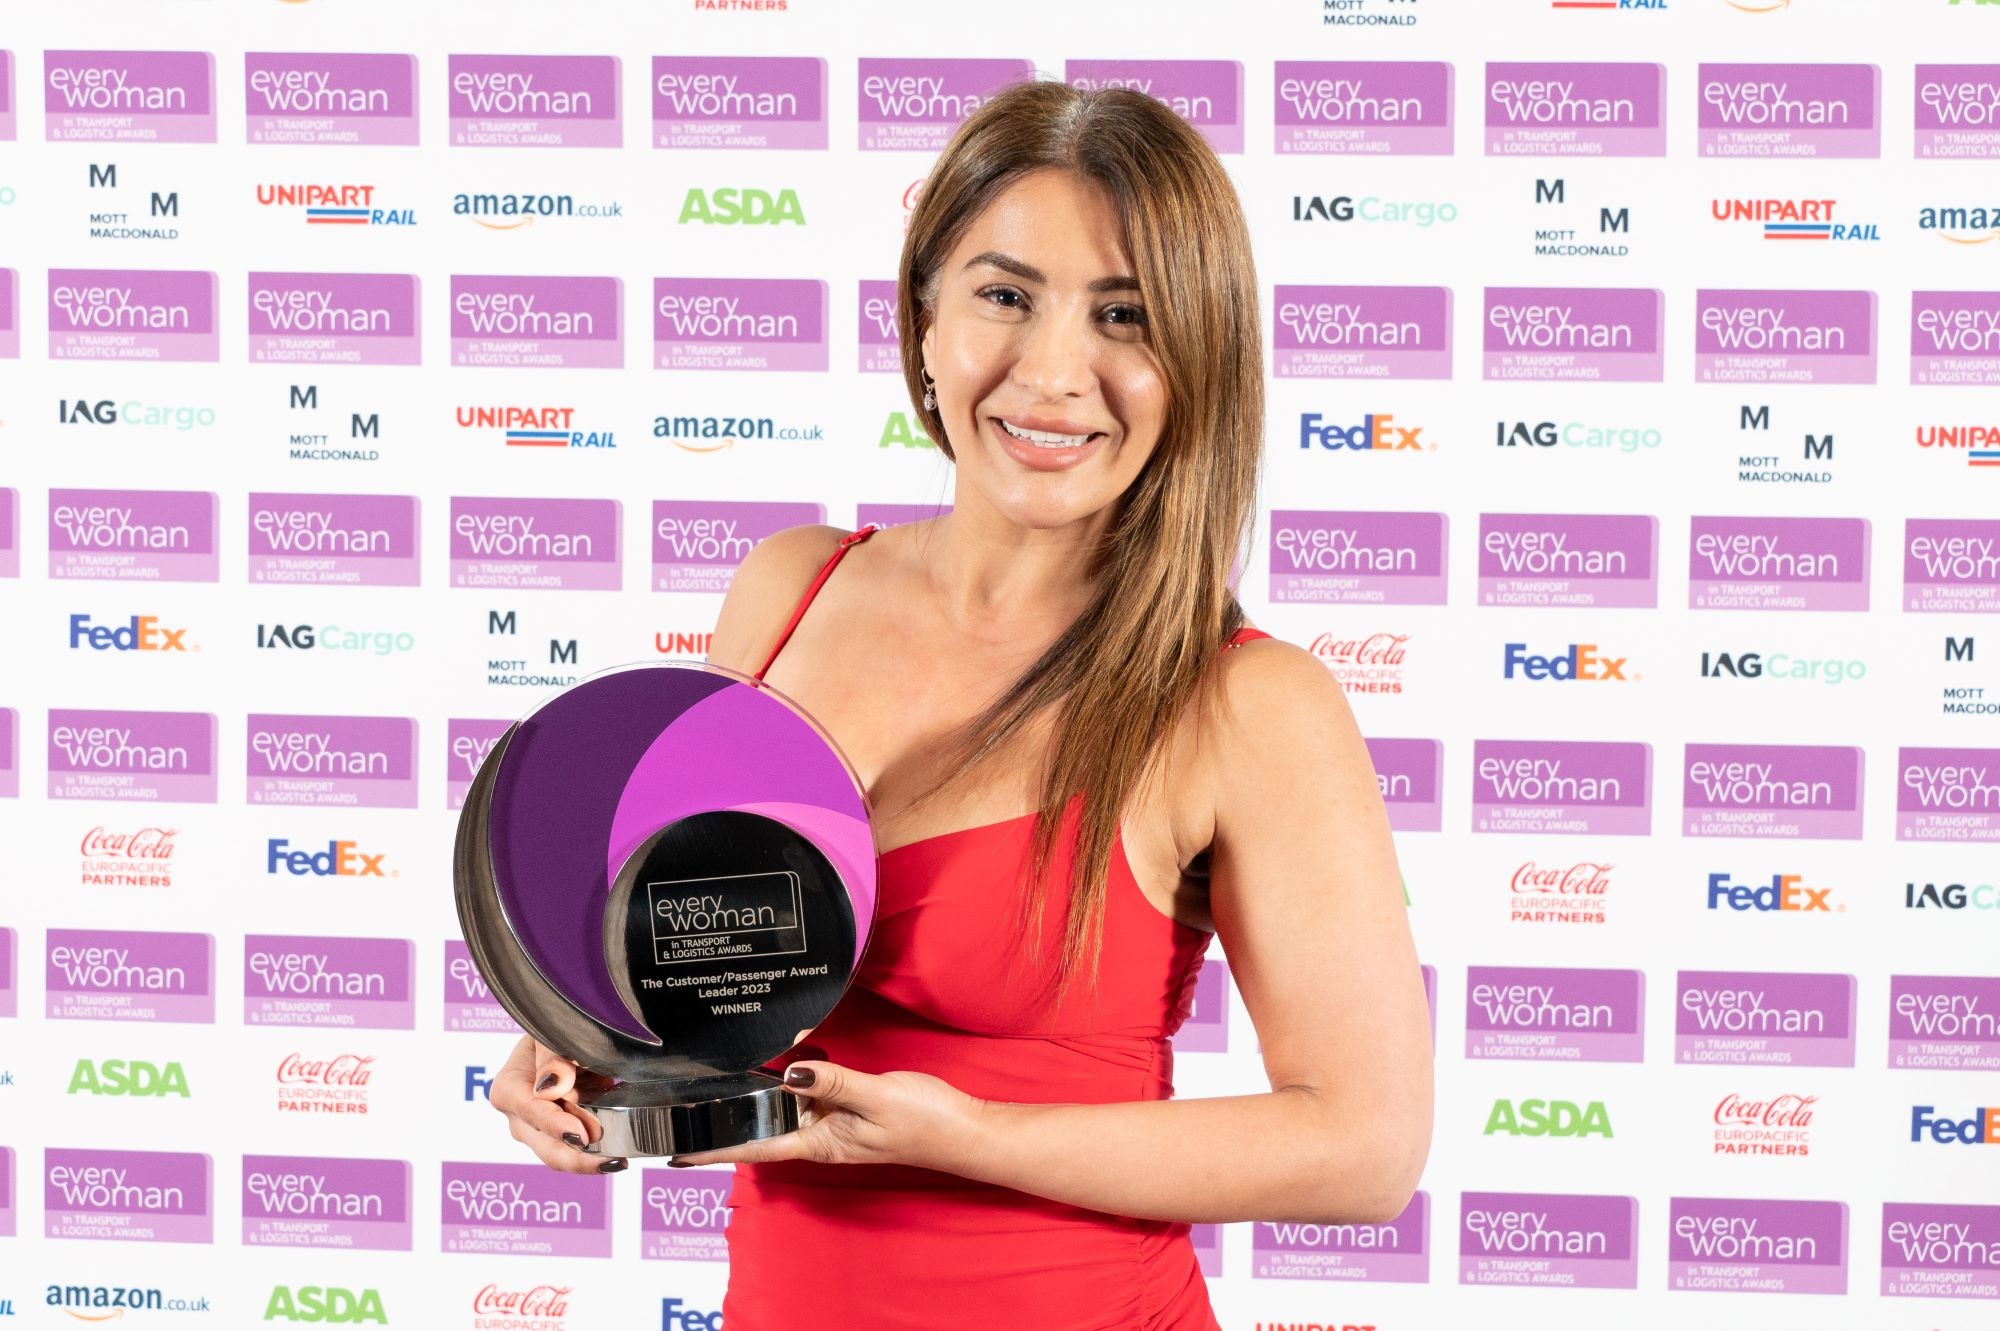 Coach and bus well represented at Everywoman Transport and Logistics Awards 2023